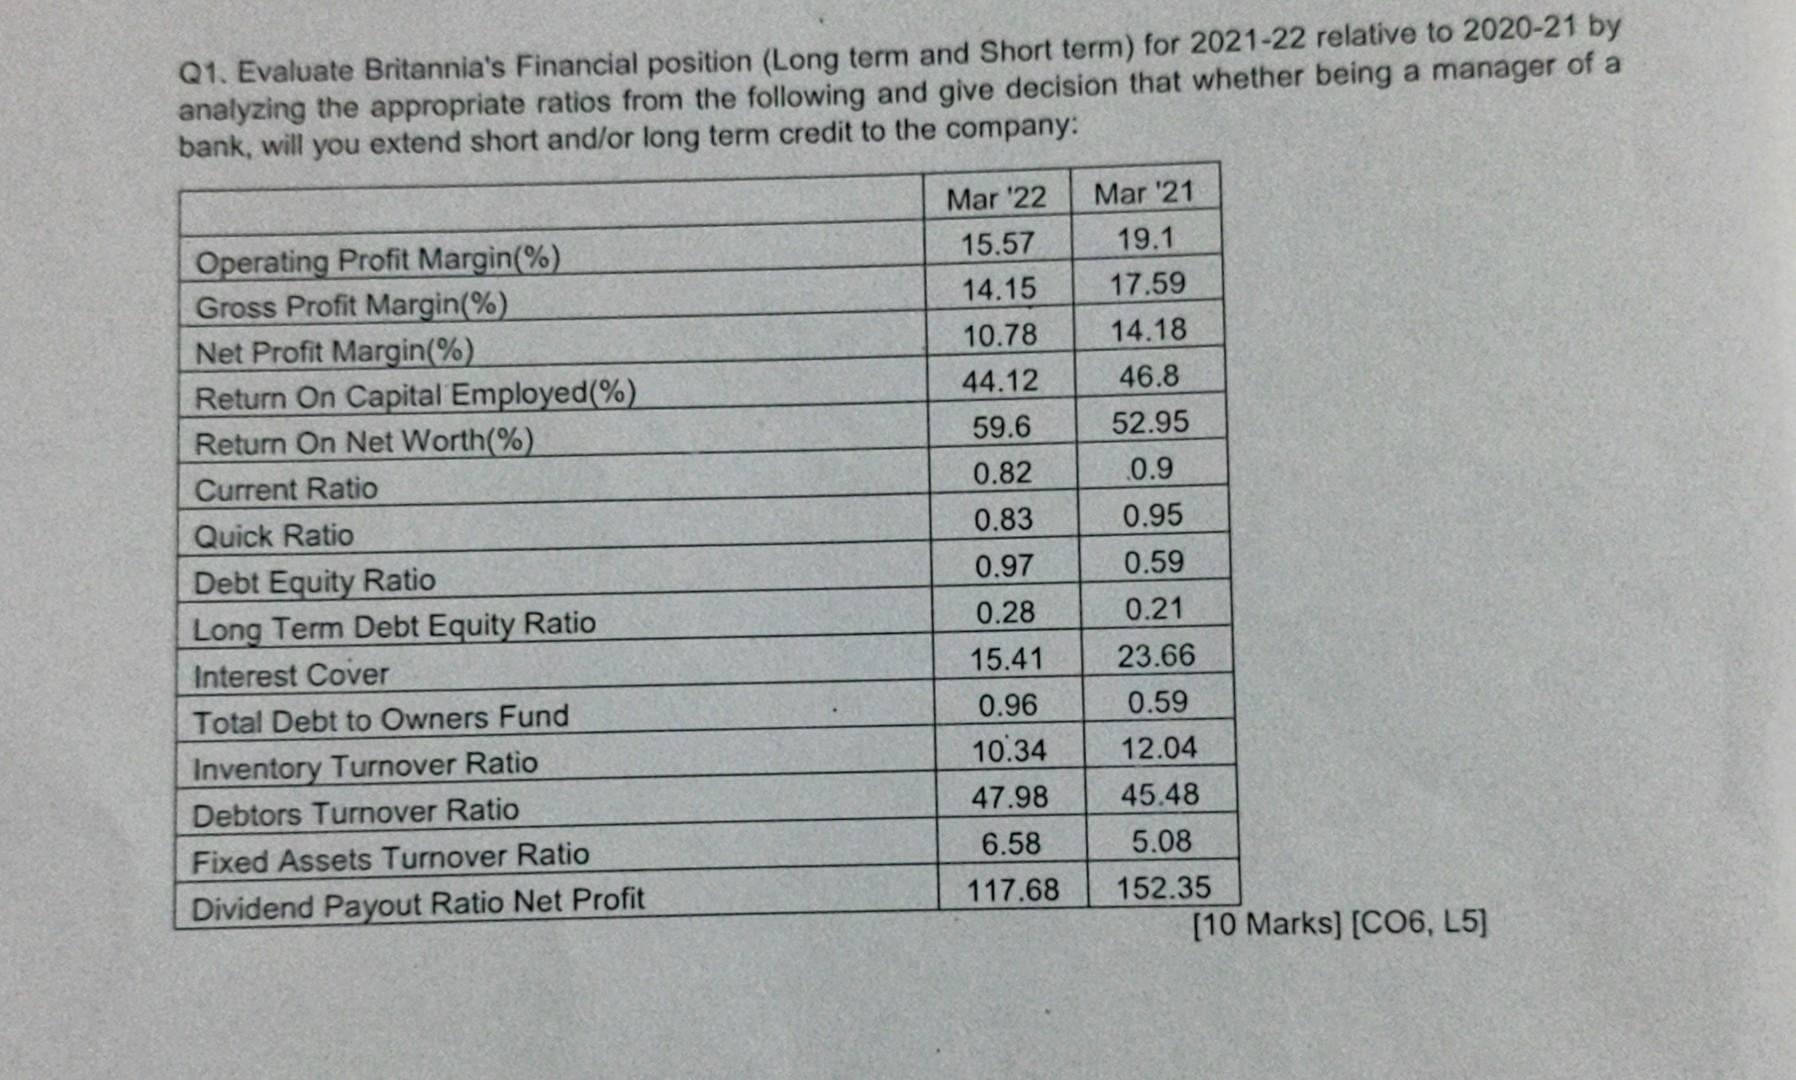 Q1. Evaluate Britannia's Financial position (Long term and Short term) for 2021-22 relative to 2020-21 by